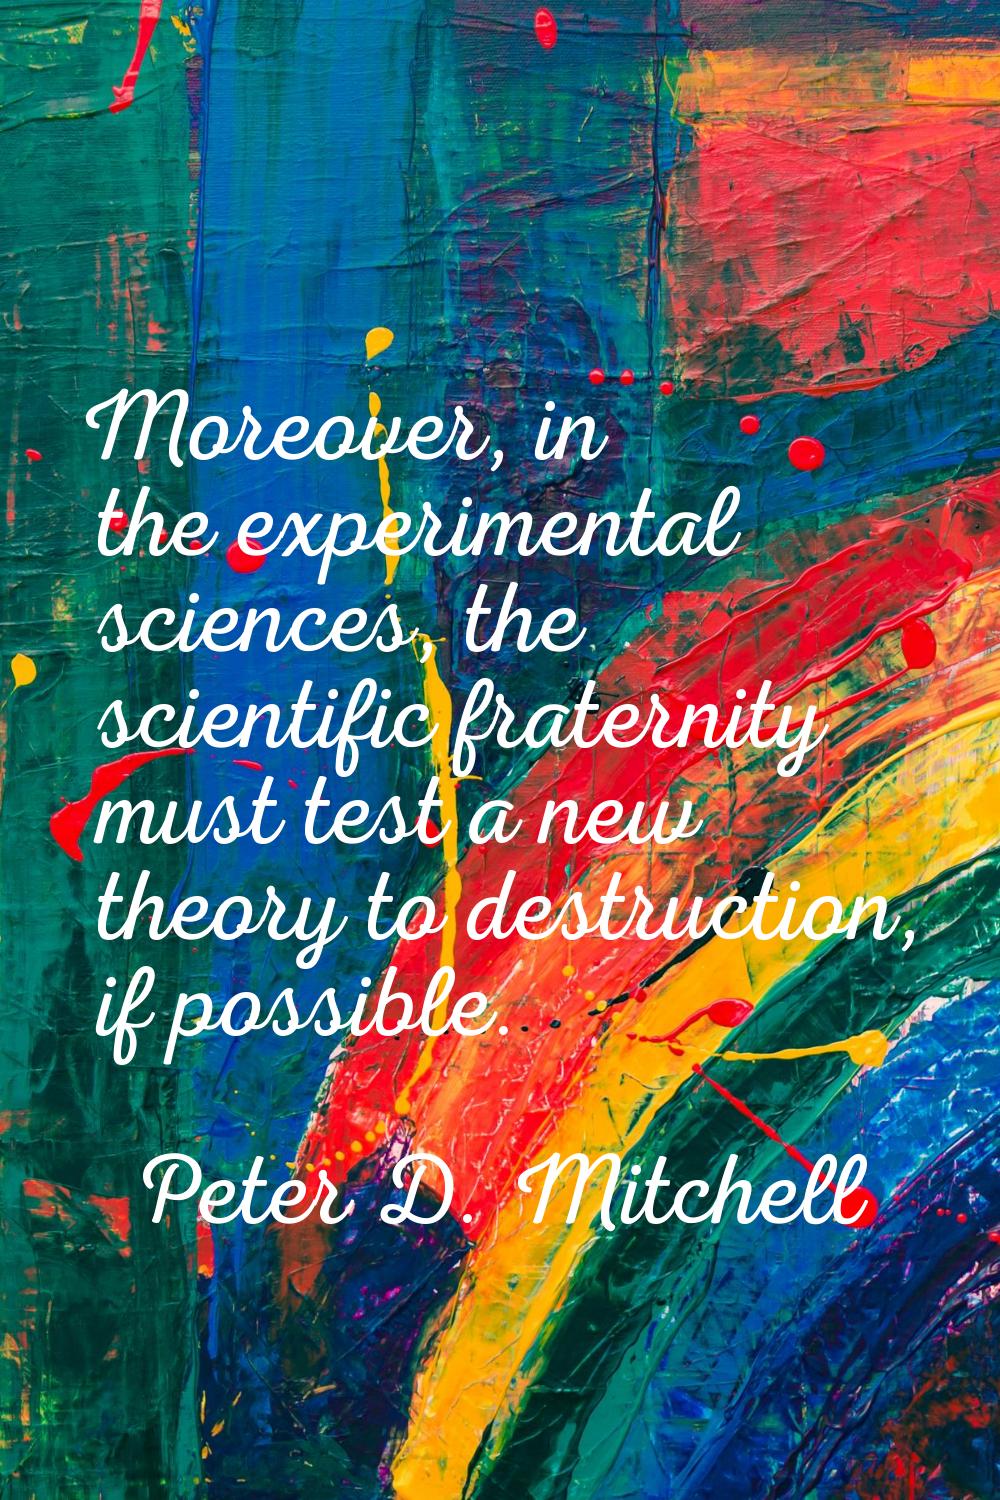 Moreover, in the experimental sciences, the scientific fraternity must test a new theory to destruc